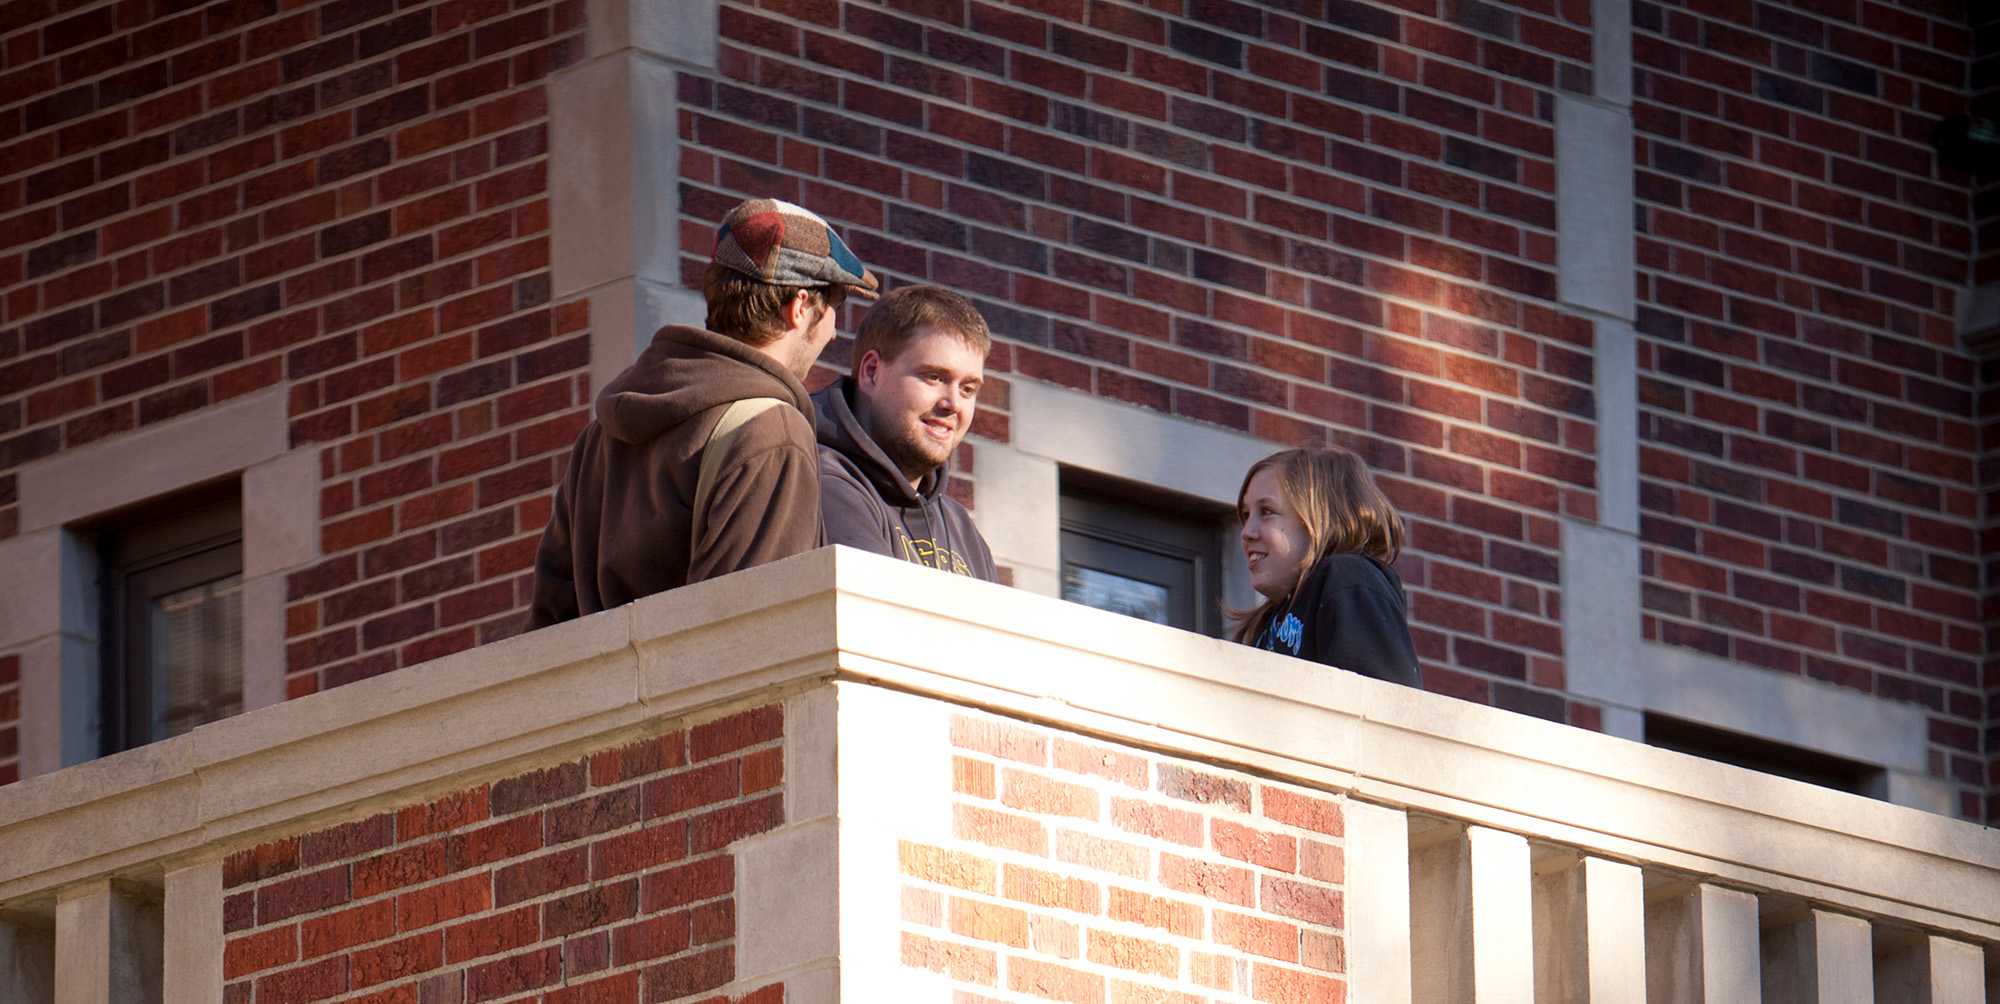 Students talking on a balcony at Fees Hall